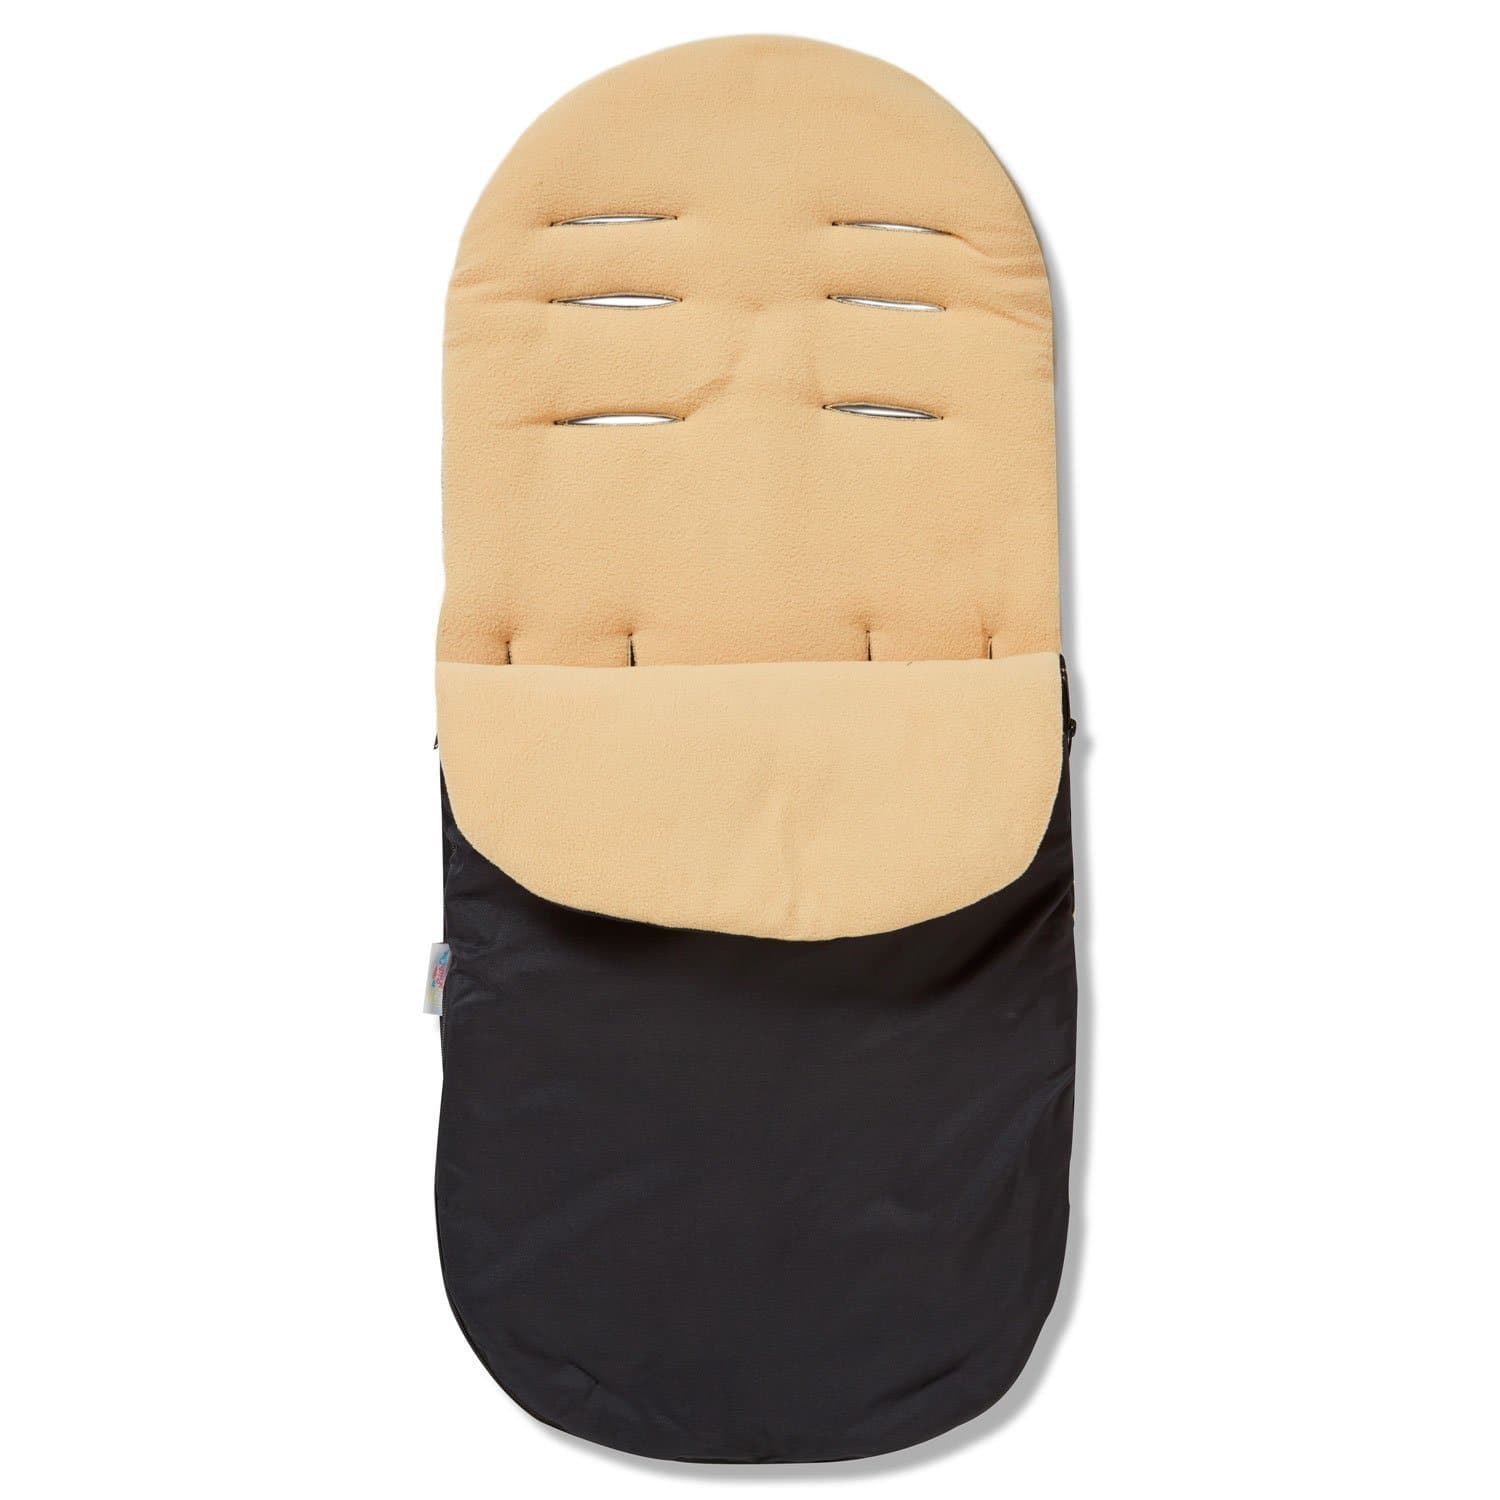 Footmuff / Cosy Toes Compatible with Venicci - For Your Little One